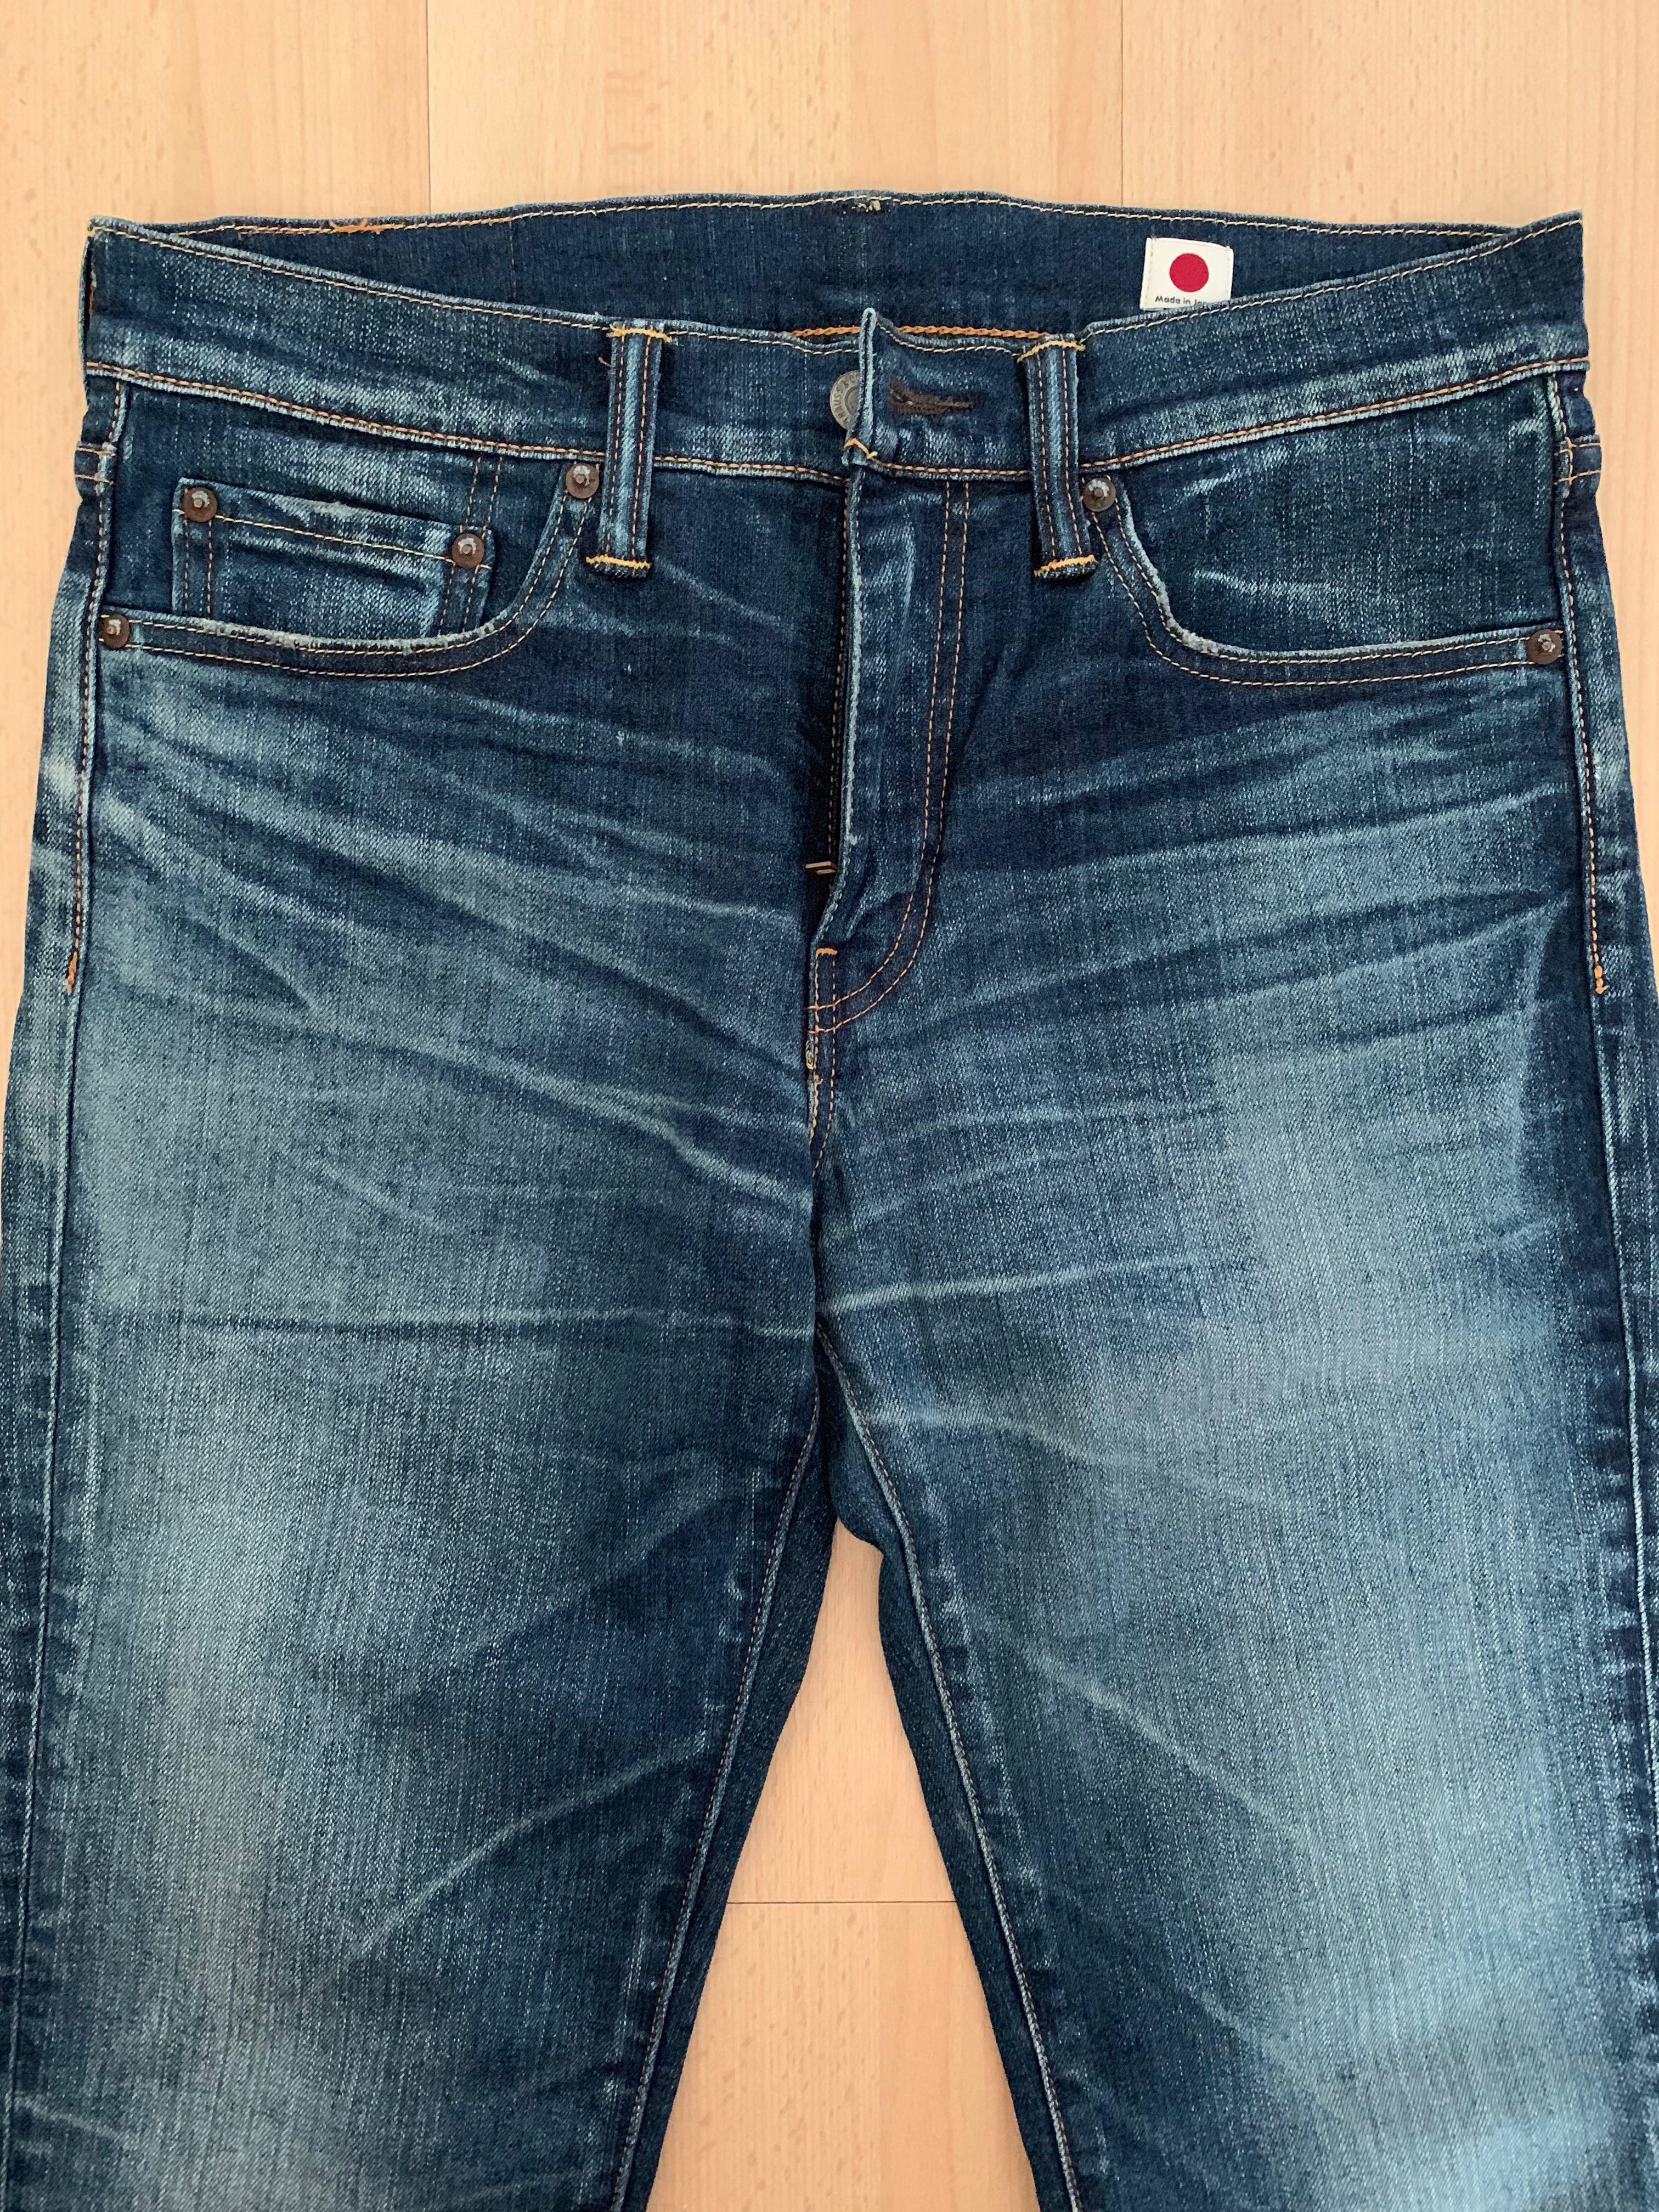 Levi's 511 Made in Japan, Men's Fashion, Bottoms, Jeans on Carousell